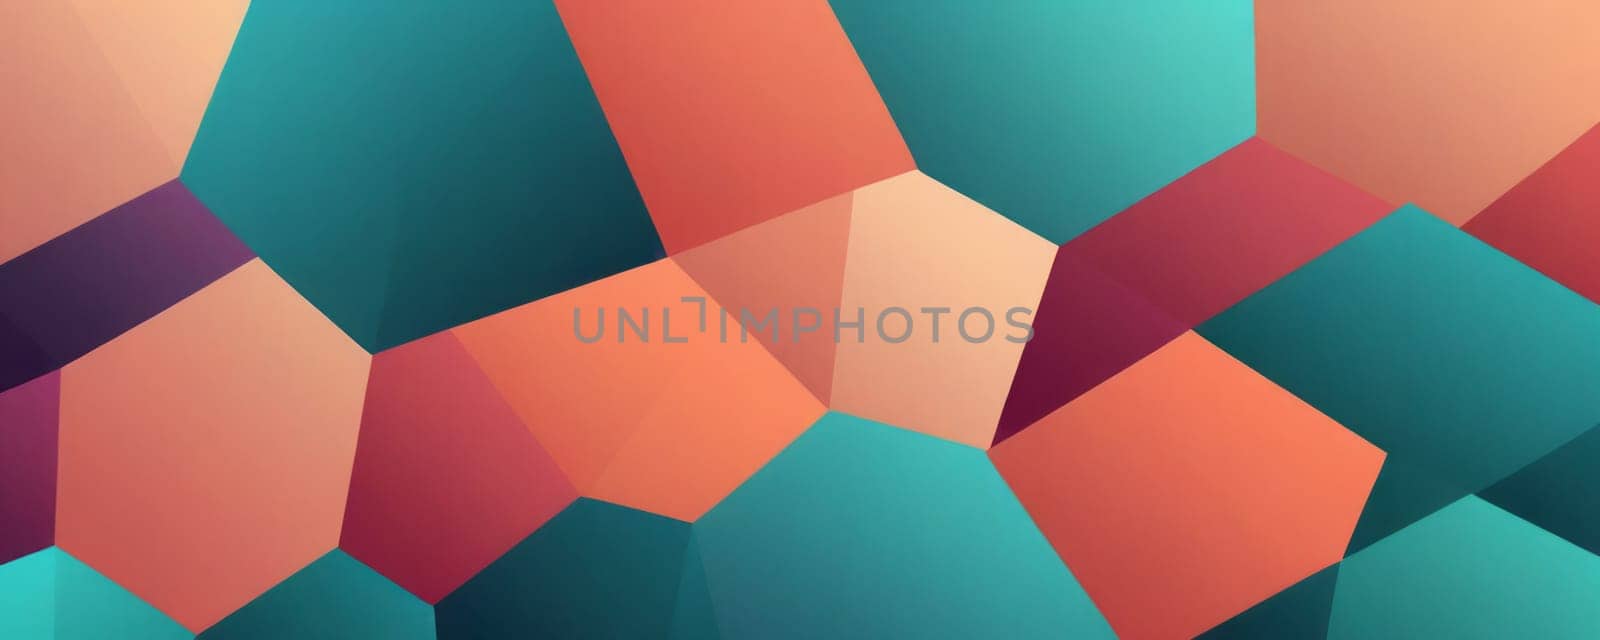 Pentagonal Shapes in Teal and Salmon by nkotlyar